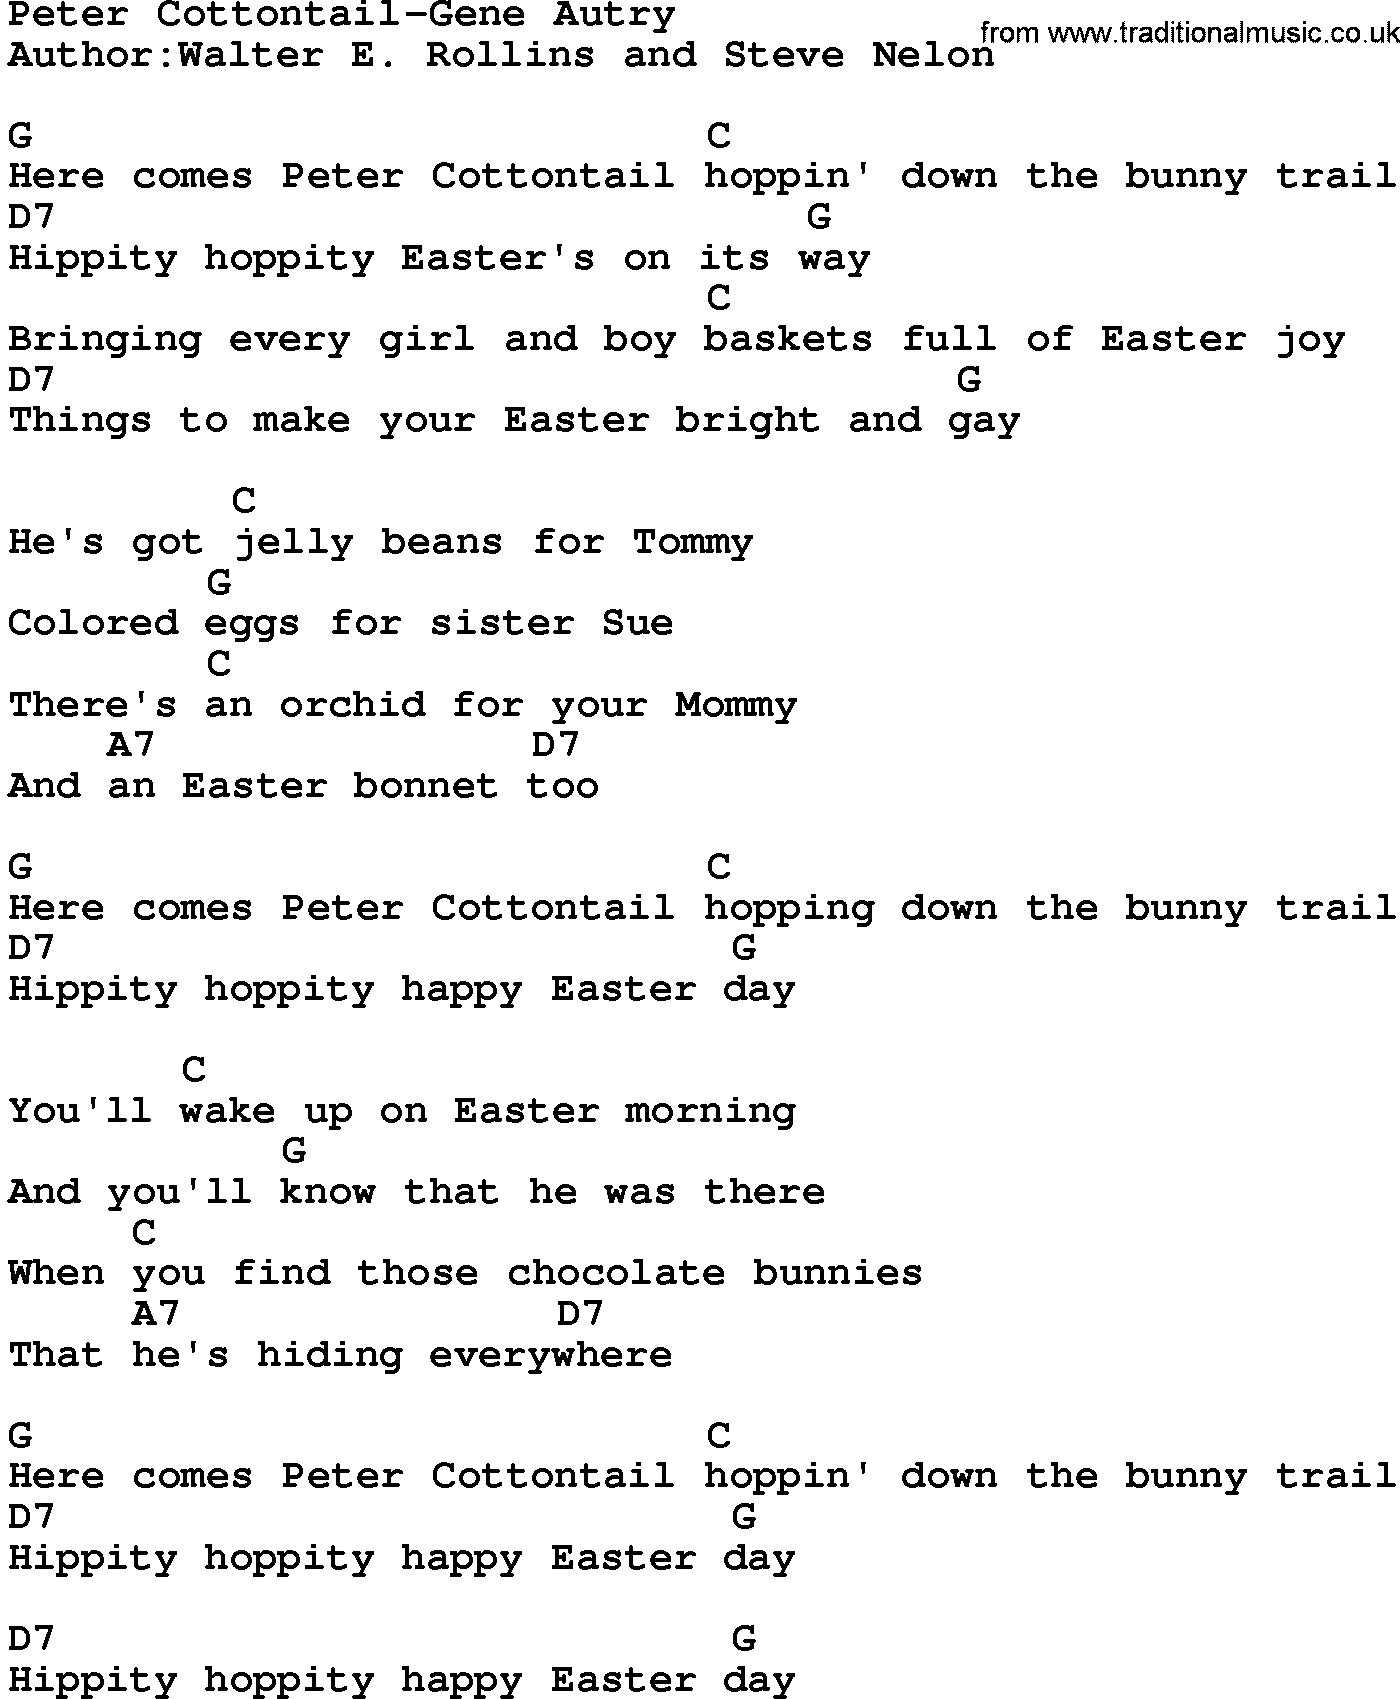 Country music song: Peter Cottontail-Gene Autry lyrics and chords